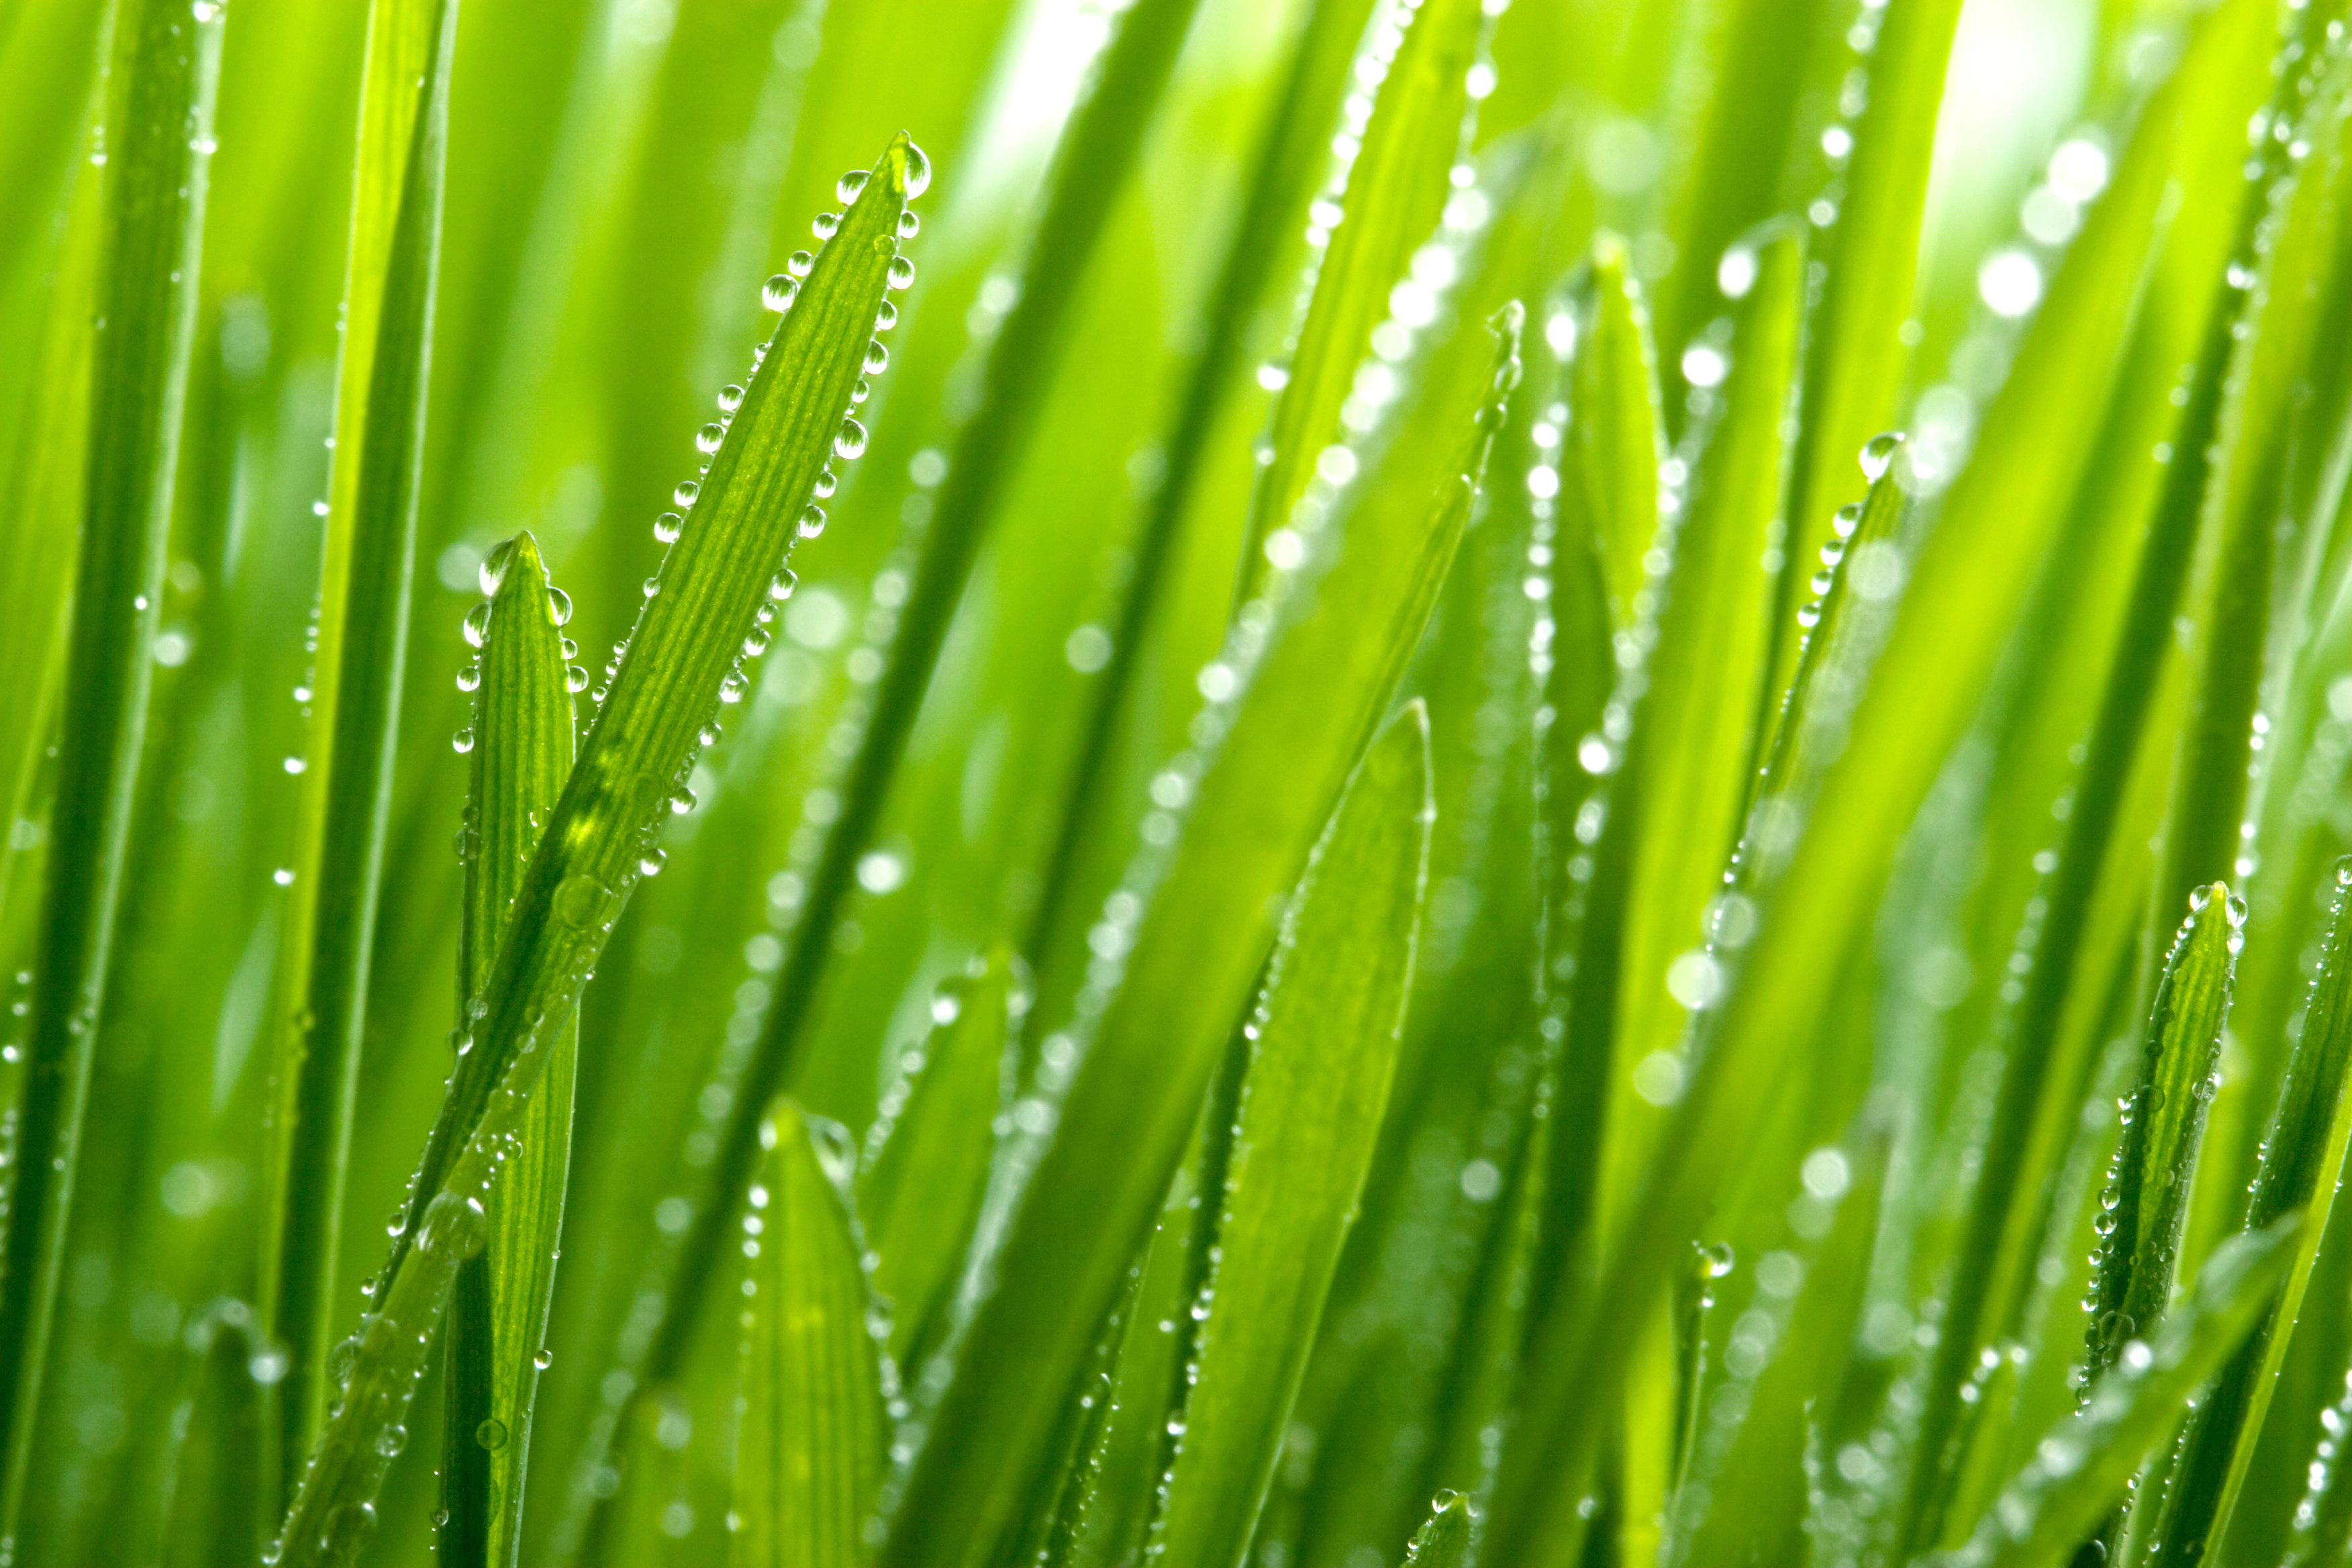 Closeup of grass blades with dew on them